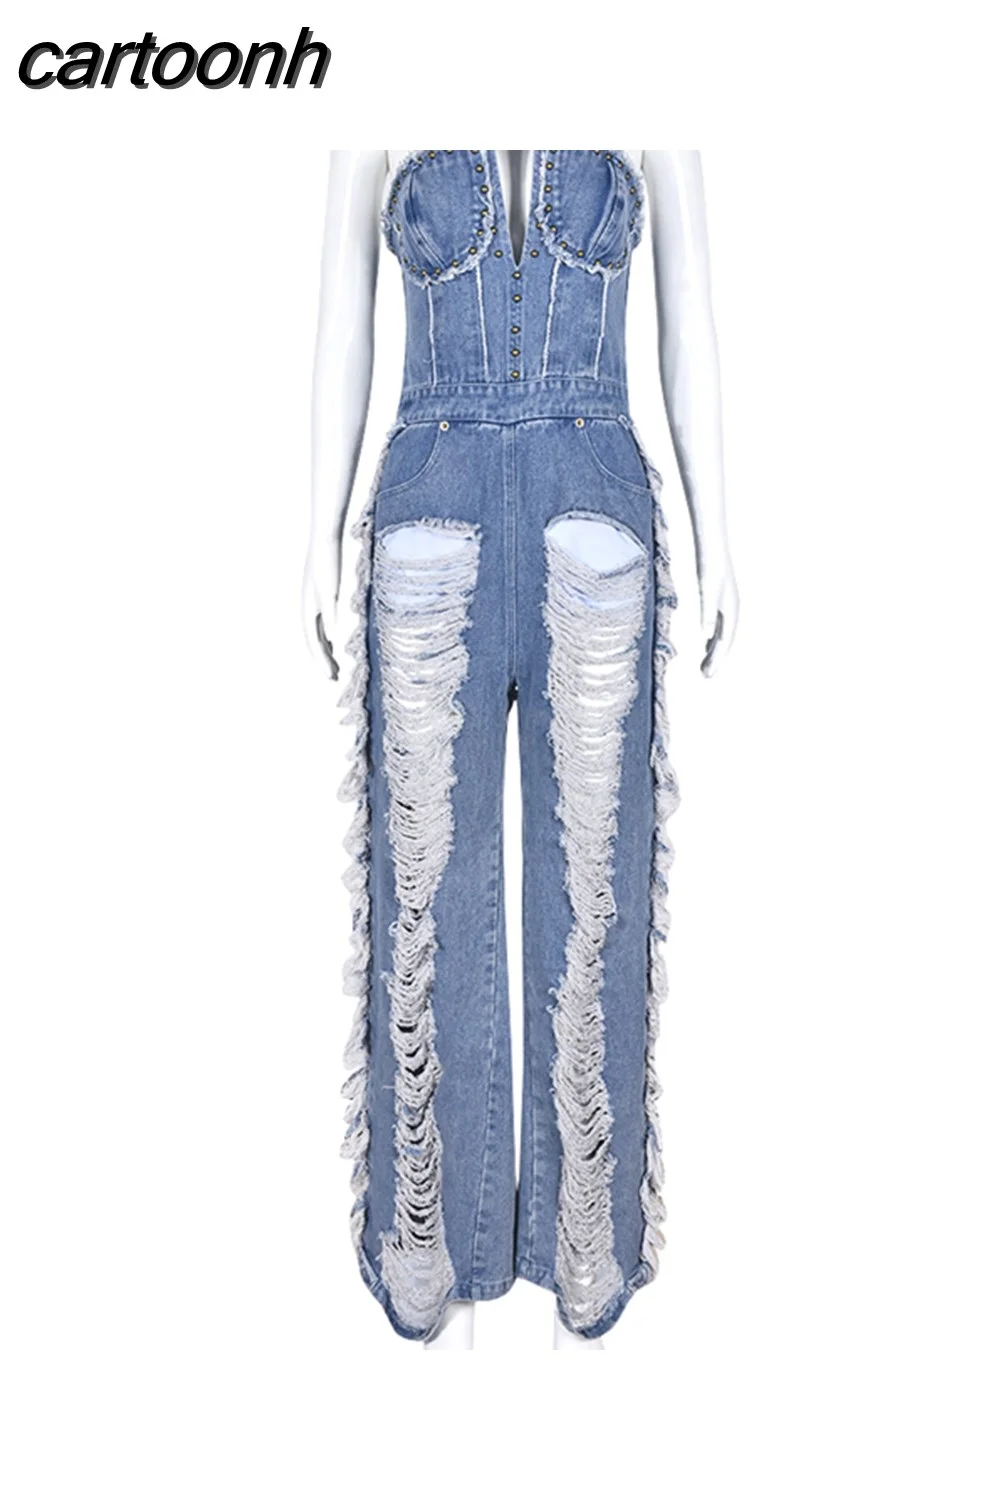 cartoonh Summer Sexy Fashion Jumpsuit Club Outfit For Women 2023 Strapless Hollow Holes Sto Denim Jumpsuite Women Mujer